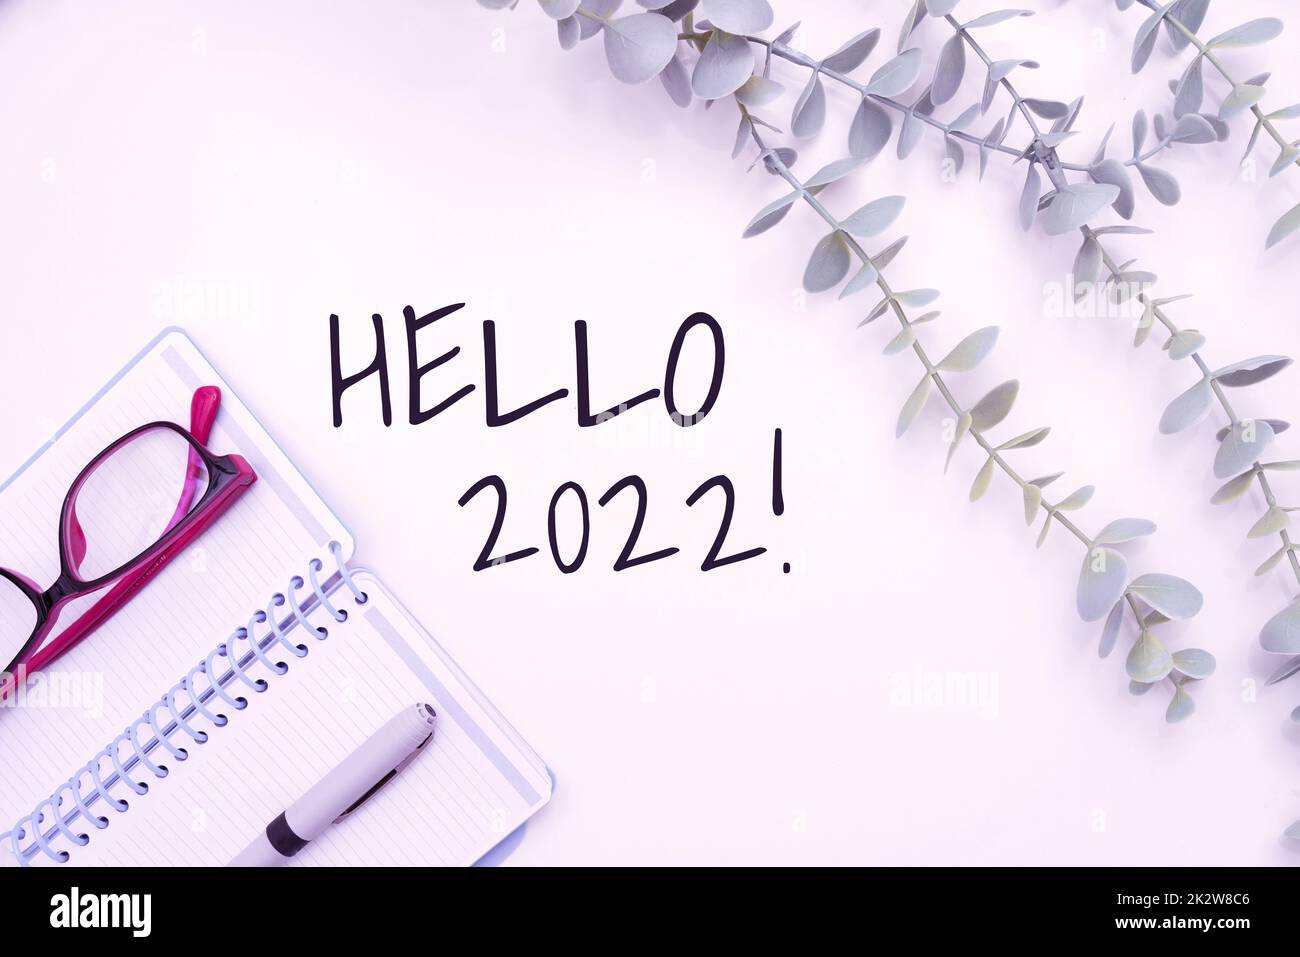 Conceptual display Hello 2022. Business overview Hoping for a greatness to happen for the coming new year Flashy School Office Supplies, Teaching Learning Collections, Writing Tools Stock Photo